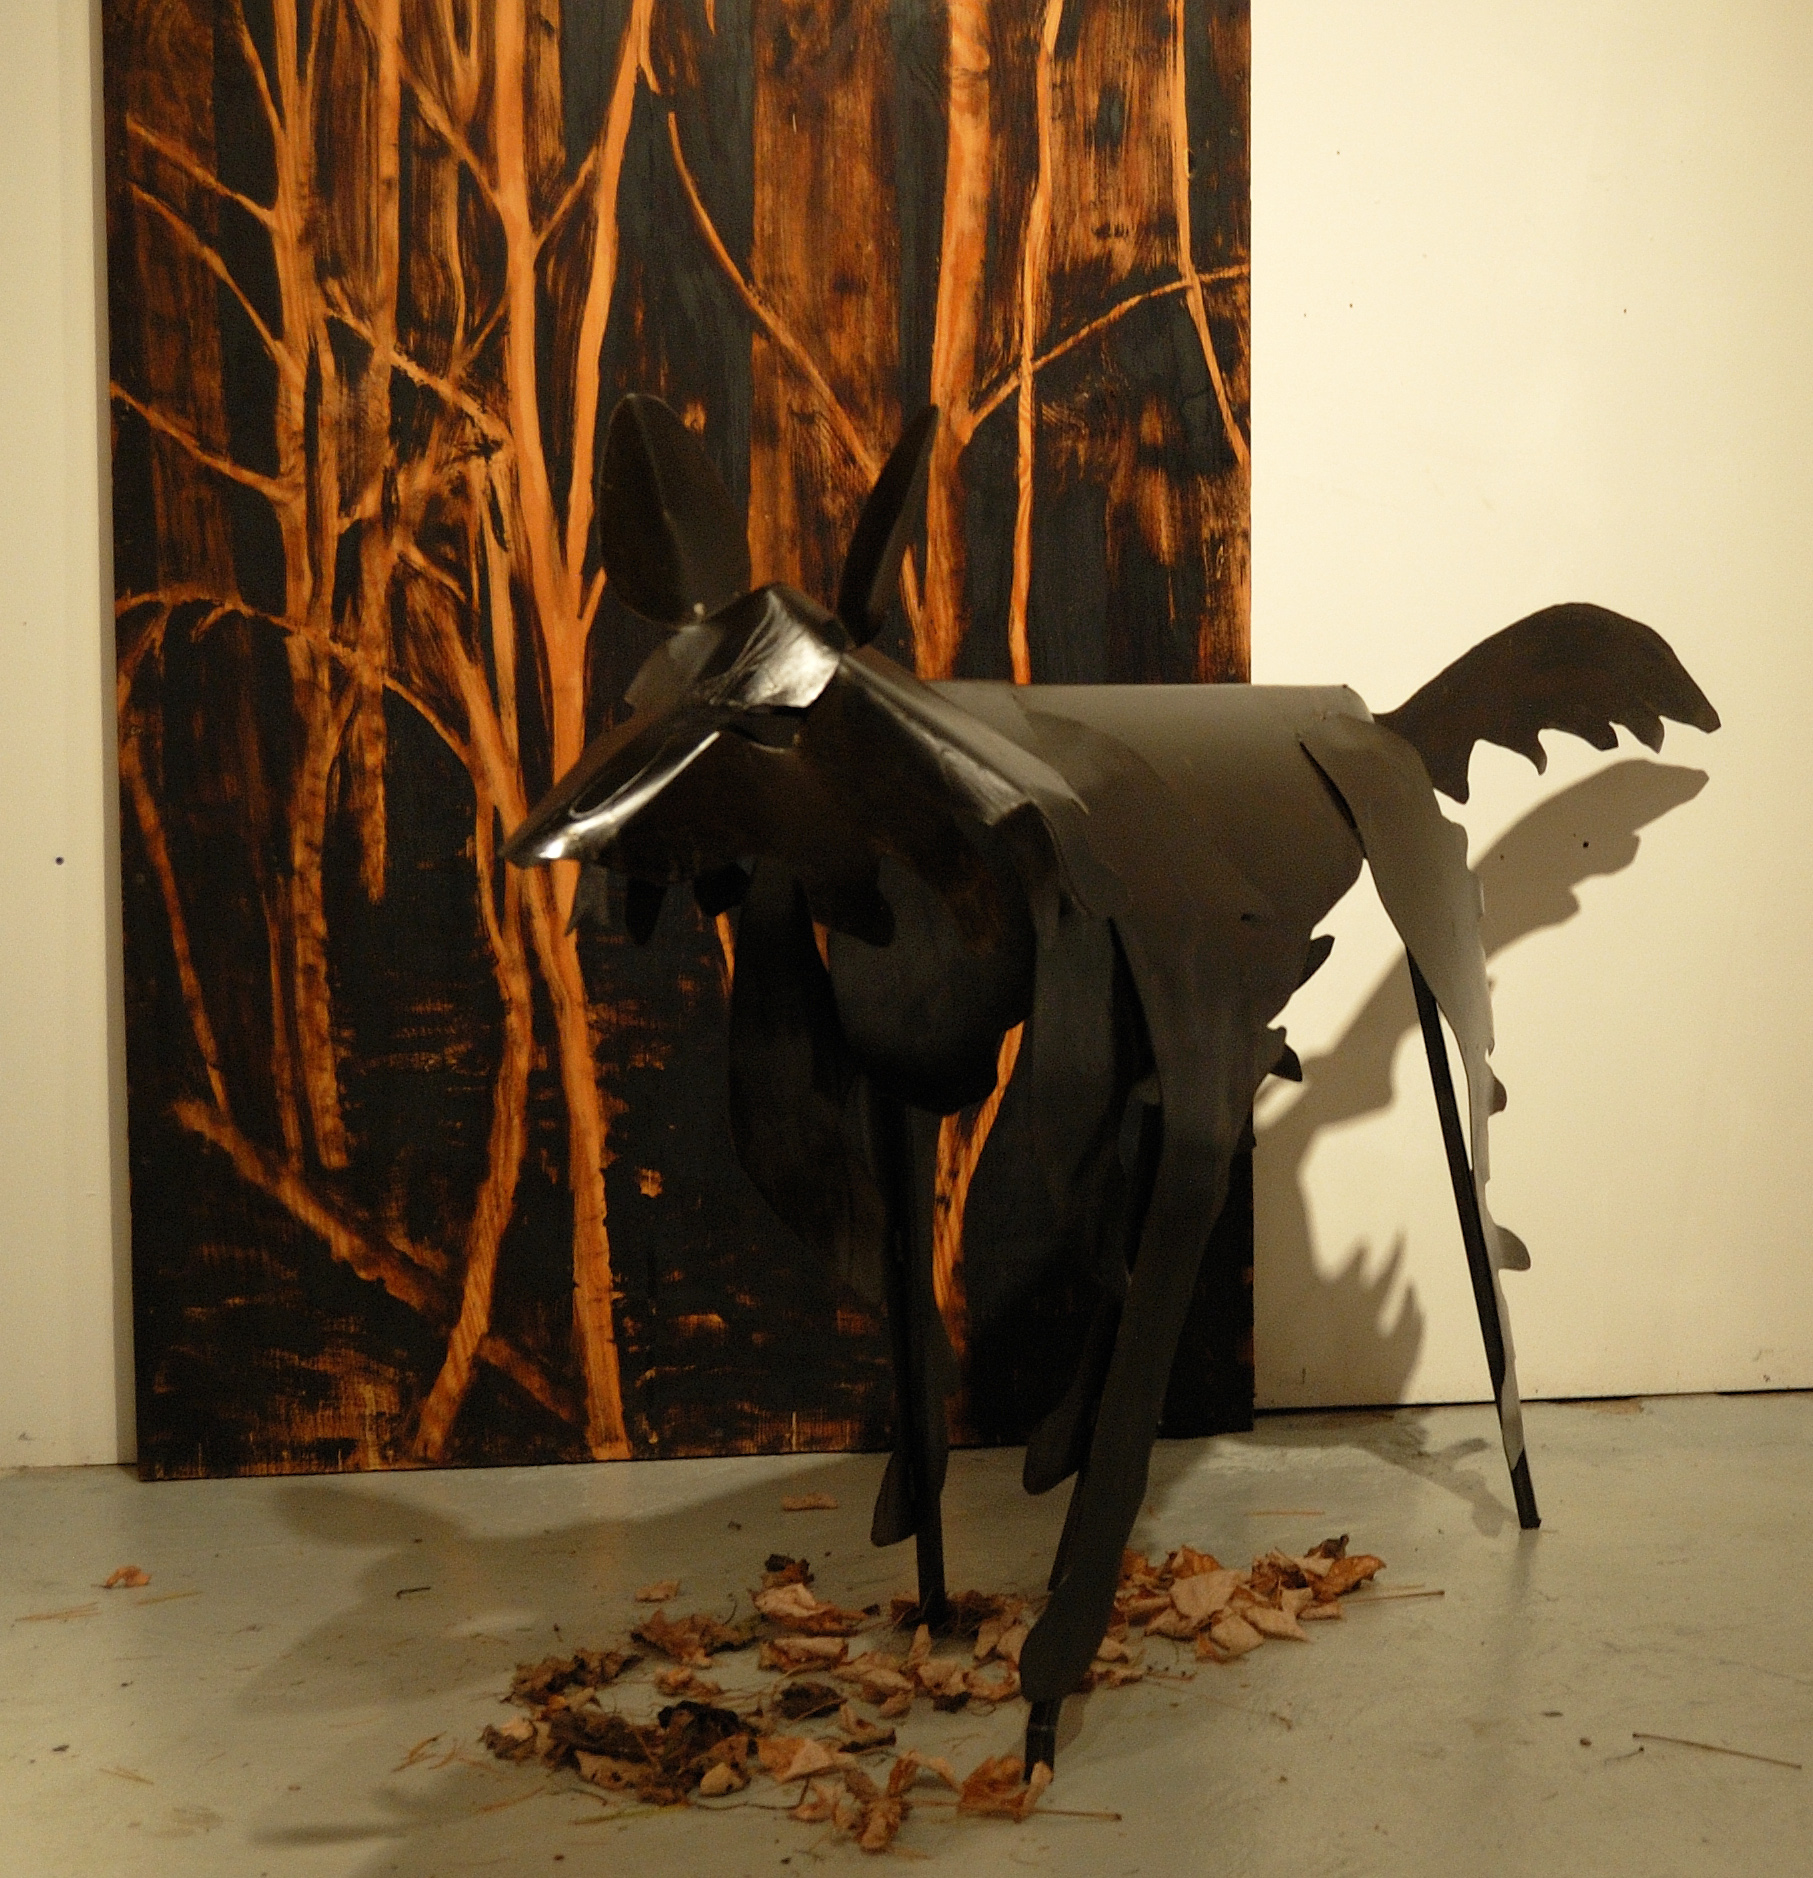  ​"Living Room" was a one-person show at Gallery 13, 811 LaSalle St., Minneapolis, MN. 
The animals are life-size, Corten steel, the panels, both freestanding 
and wall-hung, are each 4' x 8' plywood, painted in asphaltum. This is Grimm's Wolf in ste